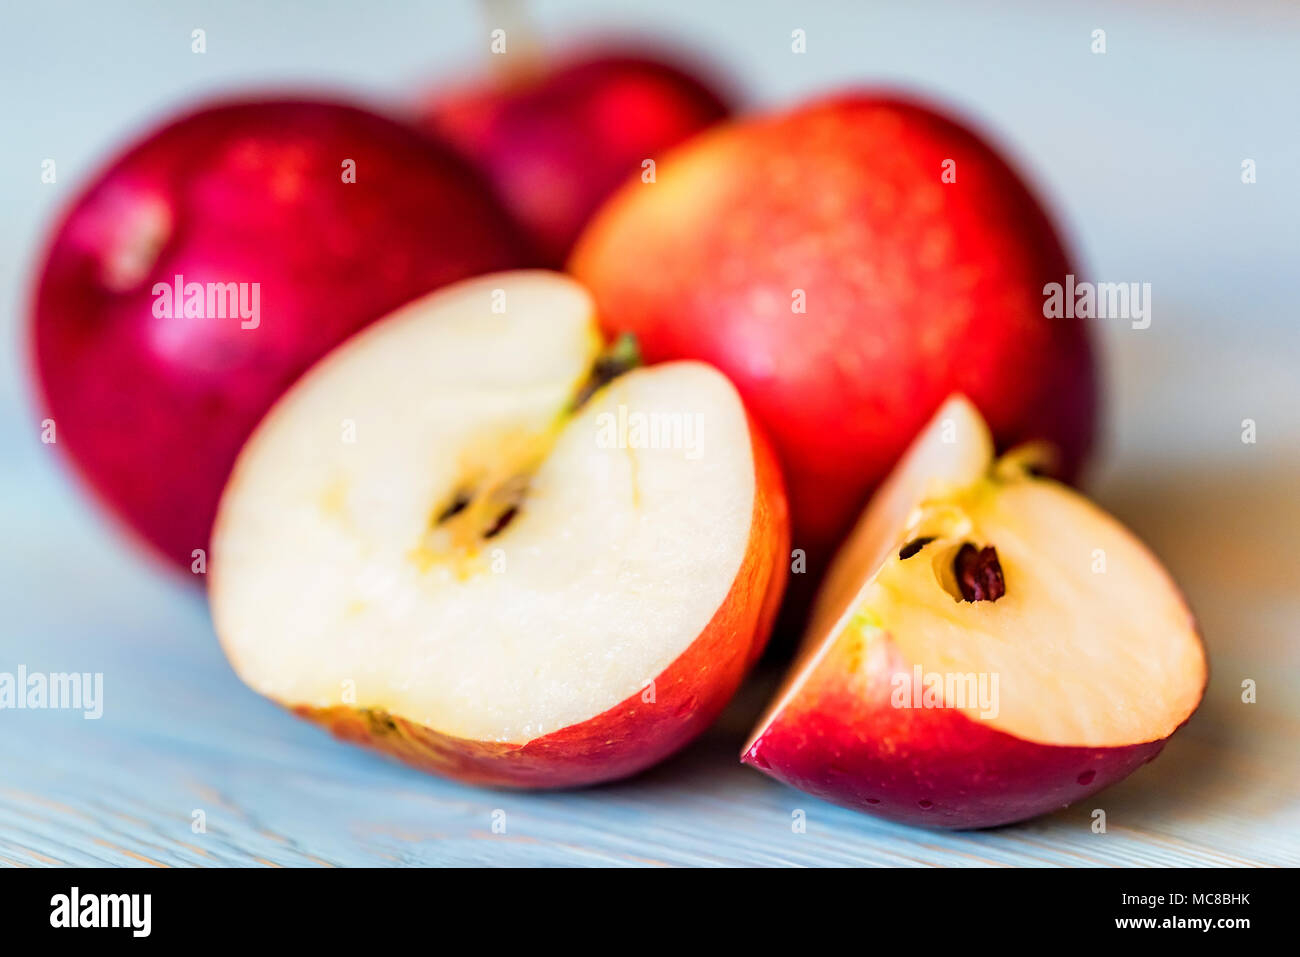 Close up ripe red apples whole and cut in halves in on light blue wooden surface. Selective focus Stock Photo